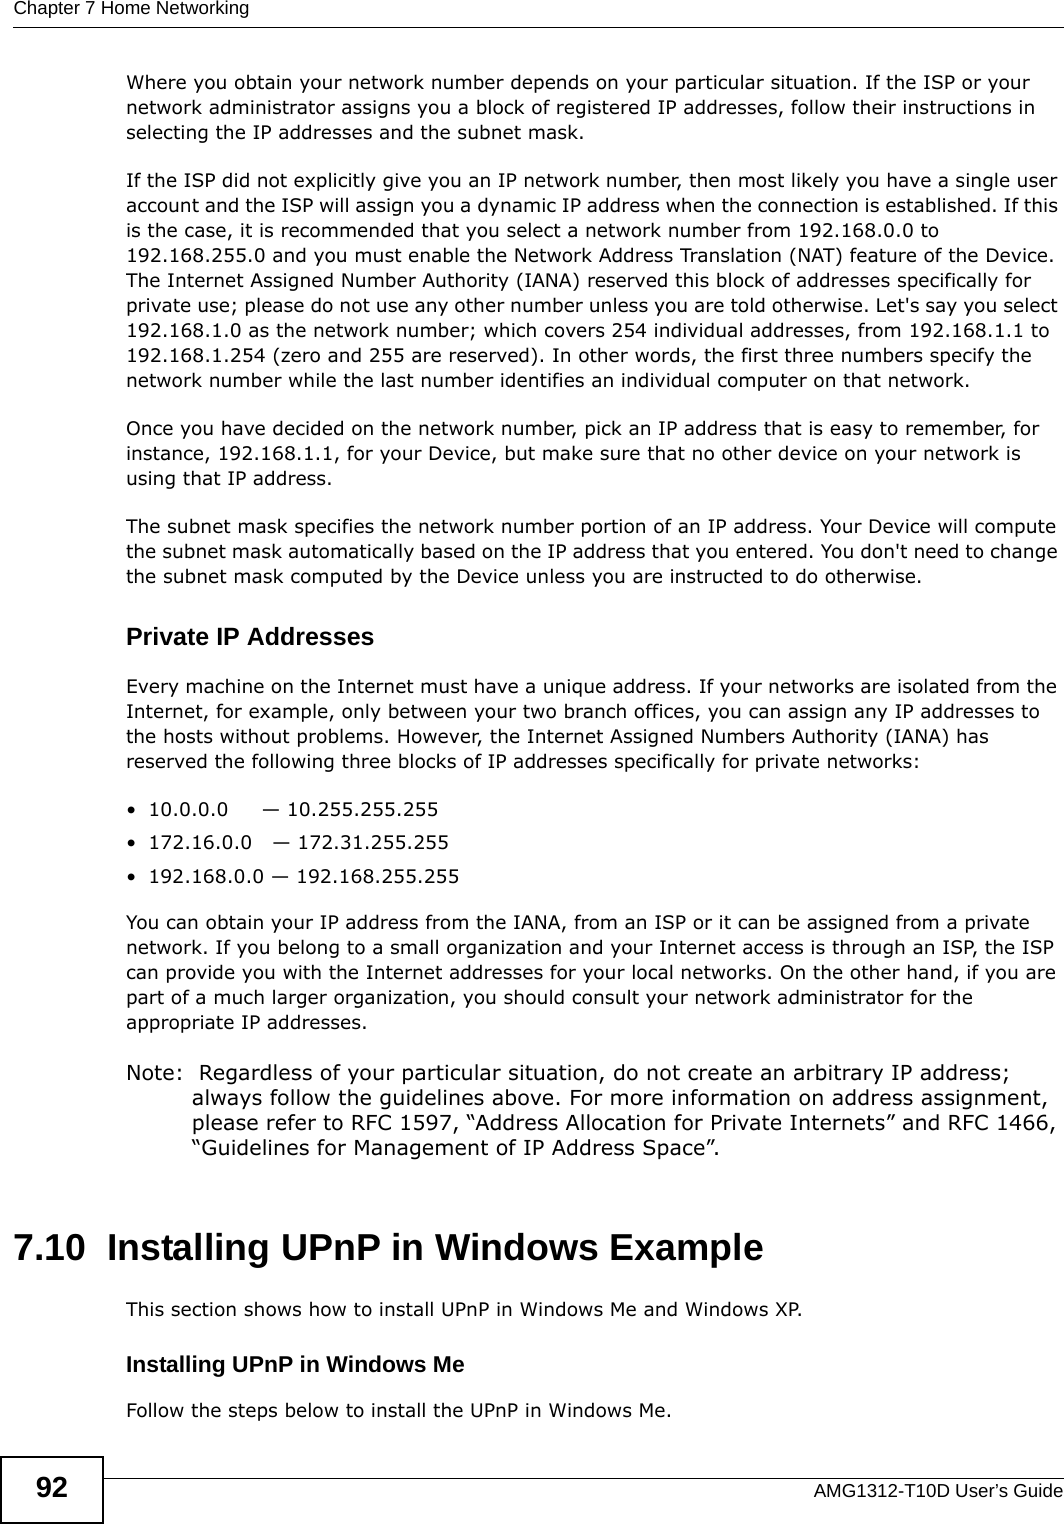 Chapter 7 Home NetworkingAMG1312-T10D User’s Guide92Where you obtain your network number depends on your particular situation. If the ISP or your network administrator assigns you a block of registered IP addresses, follow their instructions in selecting the IP addresses and the subnet mask.If the ISP did not explicitly give you an IP network number, then most likely you have a single user account and the ISP will assign you a dynamic IP address when the connection is established. If this is the case, it is recommended that you select a network number from 192.168.0.0 to 192.168.255.0 and you must enable the Network Address Translation (NAT) feature of the Device. The Internet Assigned Number Authority (IANA) reserved this block of addresses specifically for private use; please do not use any other number unless you are told otherwise. Let&apos;s say you select 192.168.1.0 as the network number; which covers 254 individual addresses, from 192.168.1.1 to 192.168.1.254 (zero and 255 are reserved). In other words, the first three numbers specify the network number while the last number identifies an individual computer on that network.Once you have decided on the network number, pick an IP address that is easy to remember, for instance, 192.168.1.1, for your Device, but make sure that no other device on your network is using that IP address.The subnet mask specifies the network number portion of an IP address. Your Device will compute the subnet mask automatically based on the IP address that you entered. You don&apos;t need to change the subnet mask computed by the Device unless you are instructed to do otherwise.Private IP AddressesEvery machine on the Internet must have a unique address. If your networks are isolated from the Internet, for example, only between your two branch offices, you can assign any IP addresses to the hosts without problems. However, the Internet Assigned Numbers Authority (IANA) has reserved the following three blocks of IP addresses specifically for private networks:• 10.0.0.0     — 10.255.255.255• 172.16.0.0   — 172.31.255.255• 192.168.0.0 — 192.168.255.255You can obtain your IP address from the IANA, from an ISP or it can be assigned from a private network. If you belong to a small organization and your Internet access is through an ISP, the ISP can provide you with the Internet addresses for your local networks. On the other hand, if you are part of a much larger organization, you should consult your network administrator for the appropriate IP addresses.Note:  Regardless of your particular situation, do not create an arbitrary IP address; always follow the guidelines above. For more information on address assignment, please refer to RFC 1597, “Address Allocation for Private Internets” and RFC 1466, “Guidelines for Management of IP Address Space”.7.10  Installing UPnP in Windows ExampleThis section shows how to install UPnP in Windows Me and Windows XP.  Installing UPnP in Windows MeFollow the steps below to install the UPnP in Windows Me. 